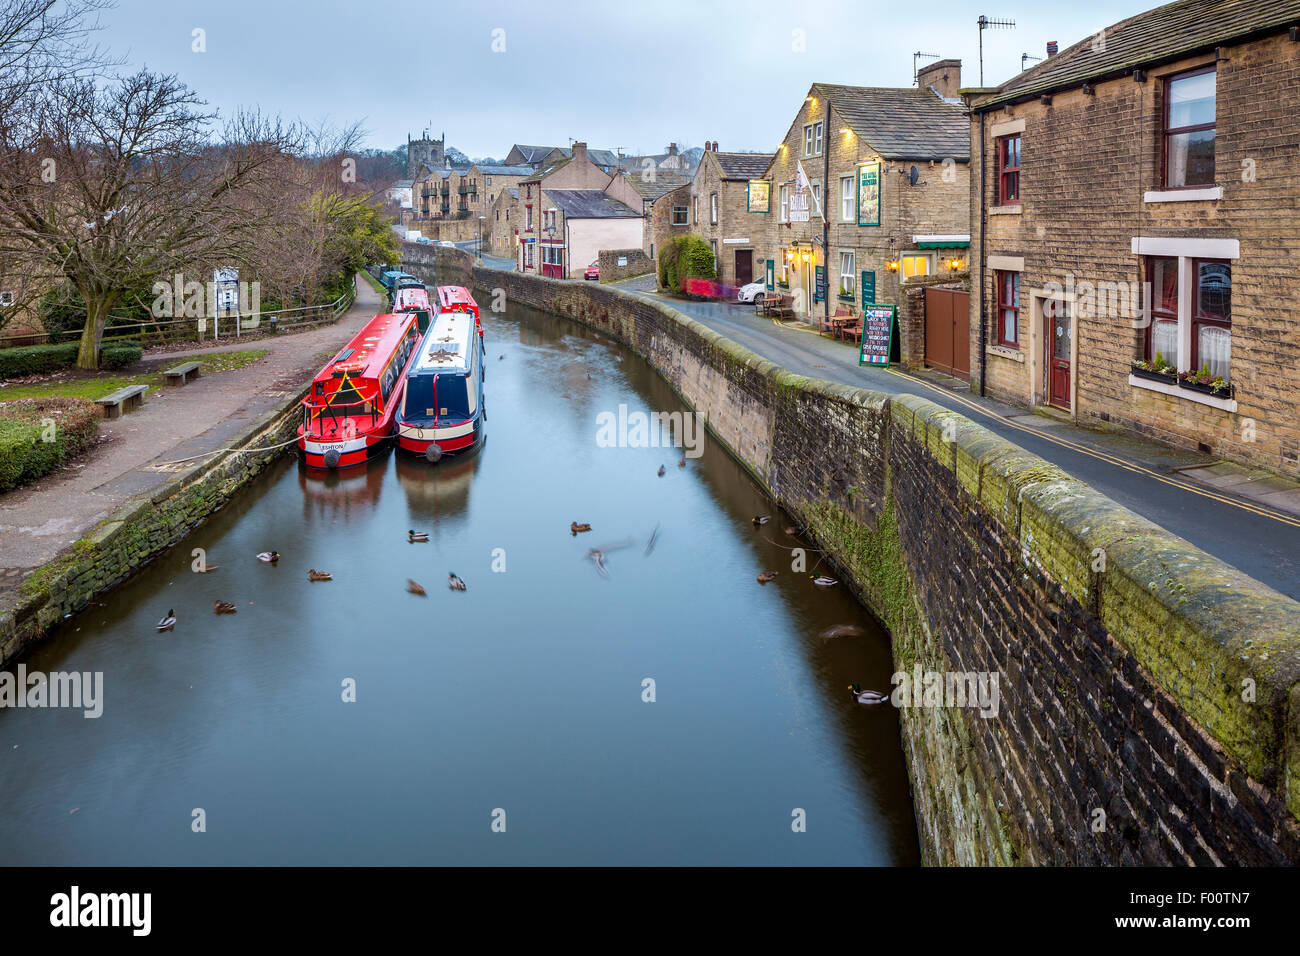 Skipton, a market town and civil parish in the Craven district of North Yorkshire, England, United Kingdom, Europe. Stock Photo